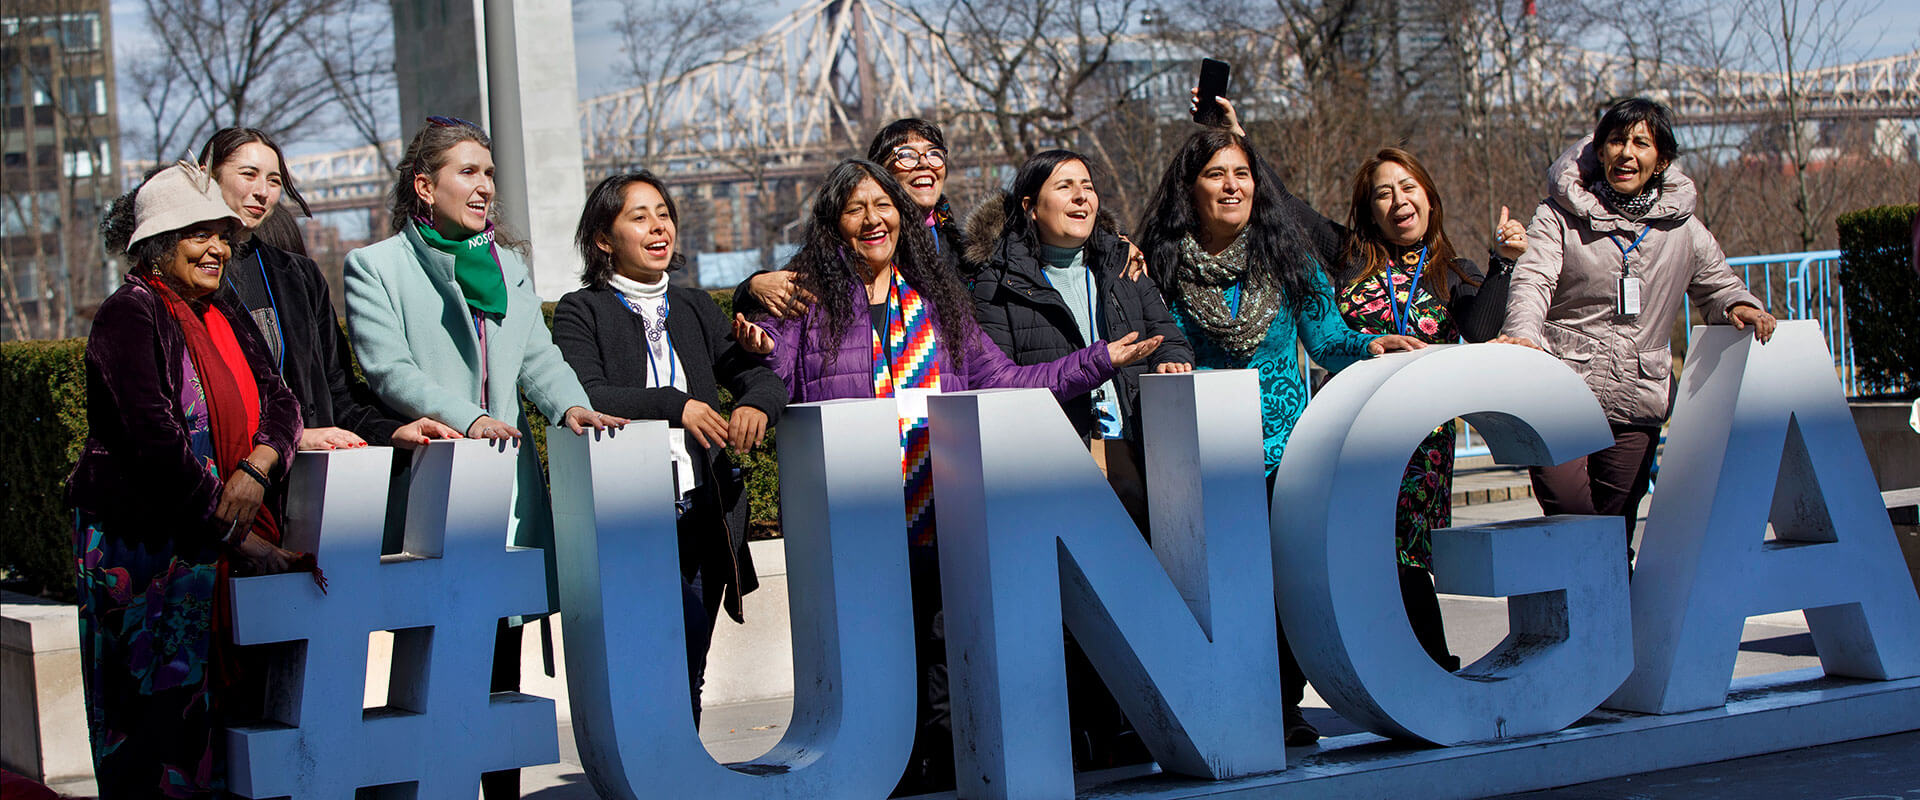 Scene outside the General Assembly building (with the #UNGA hashtag sign) following the observance of International Women’s Day 2023 at UN Headquarters in New York on 8 March 2023. Photo: UN Women/Ryan Brown.